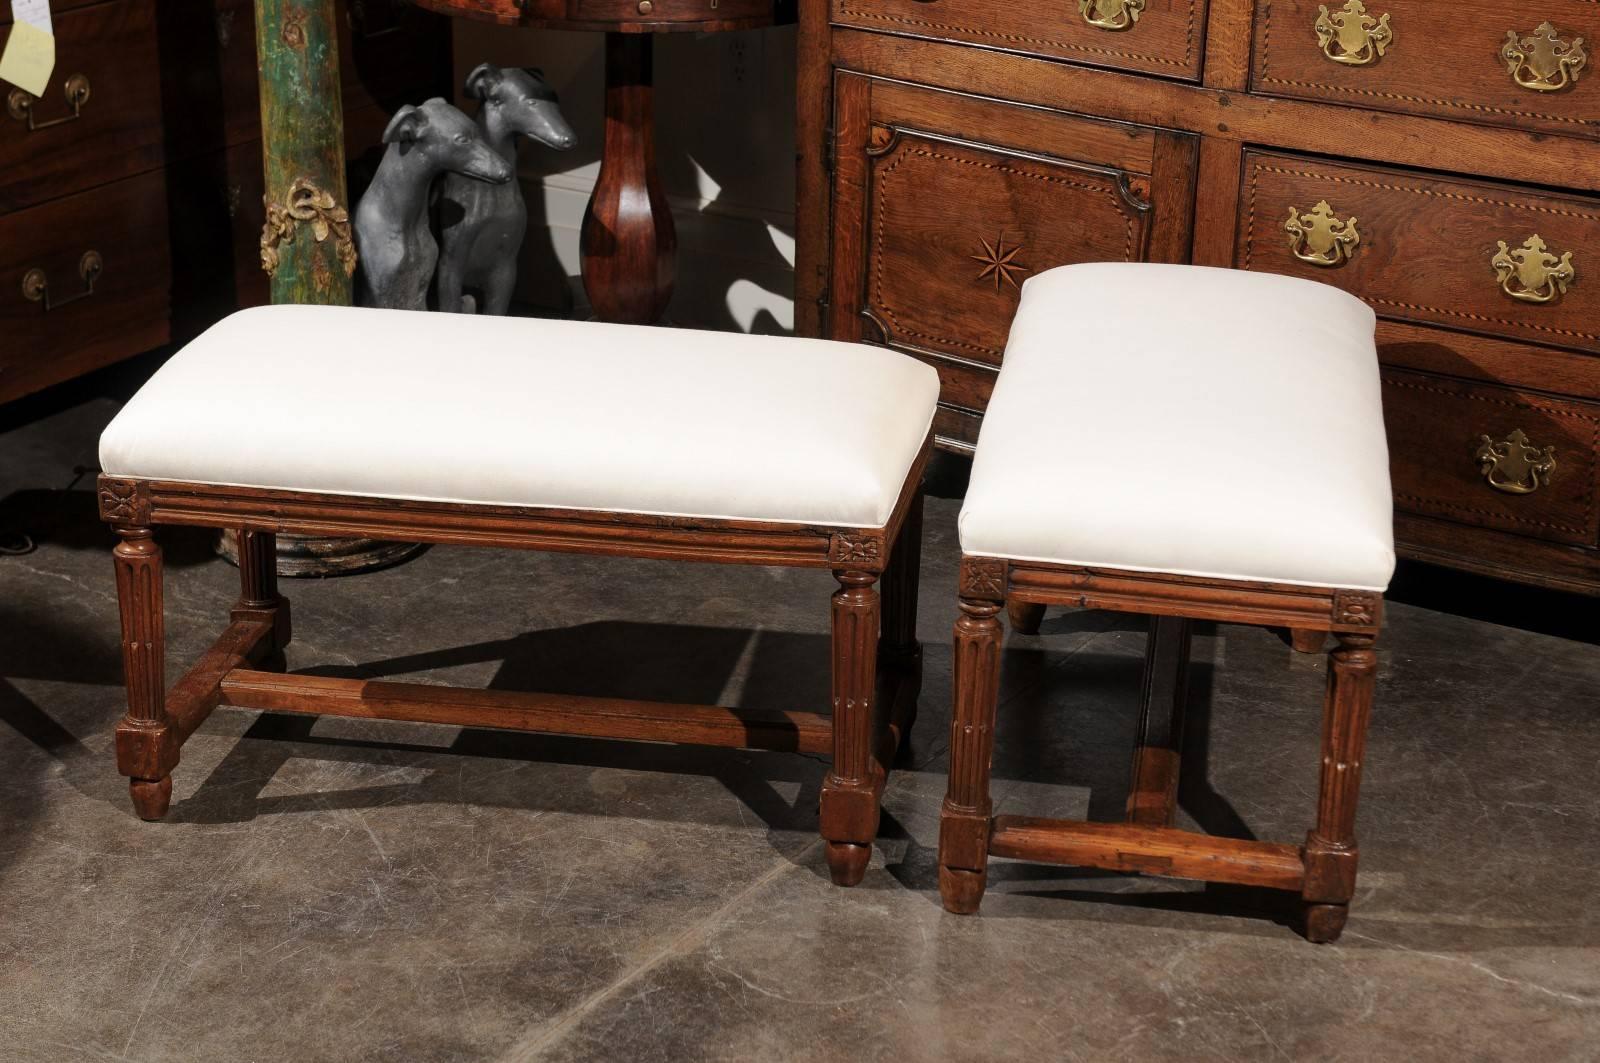 Pair of Italian Walnut Upholstered Wooden Benches from the Early 19th Century 3